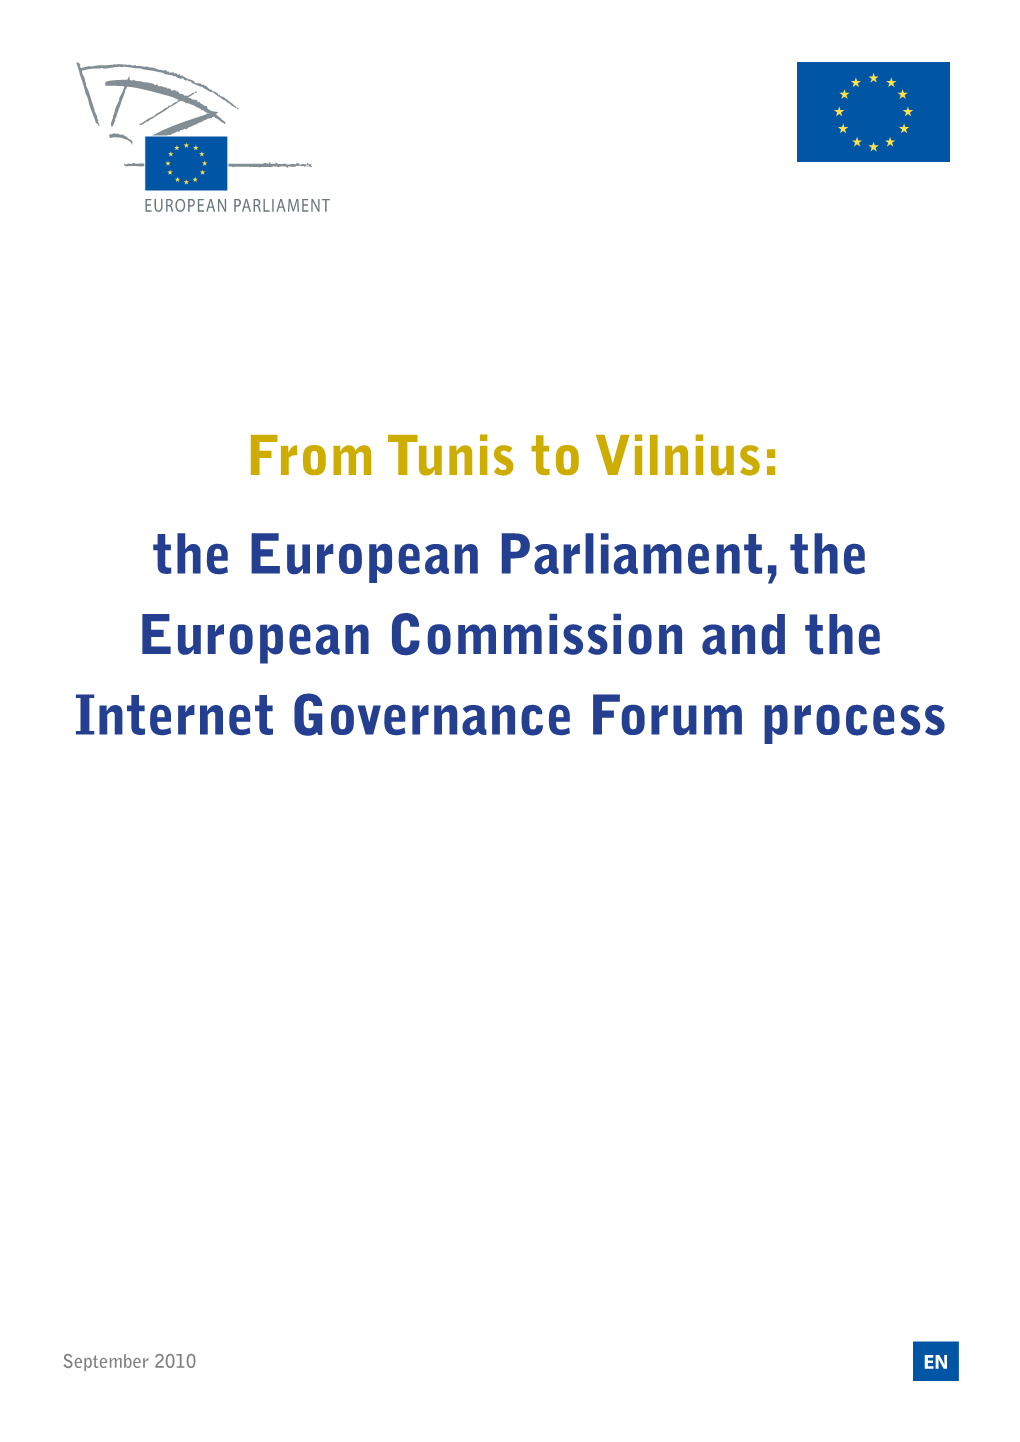 The European Parliament, the European Commission and the Internet Governance Forum Process